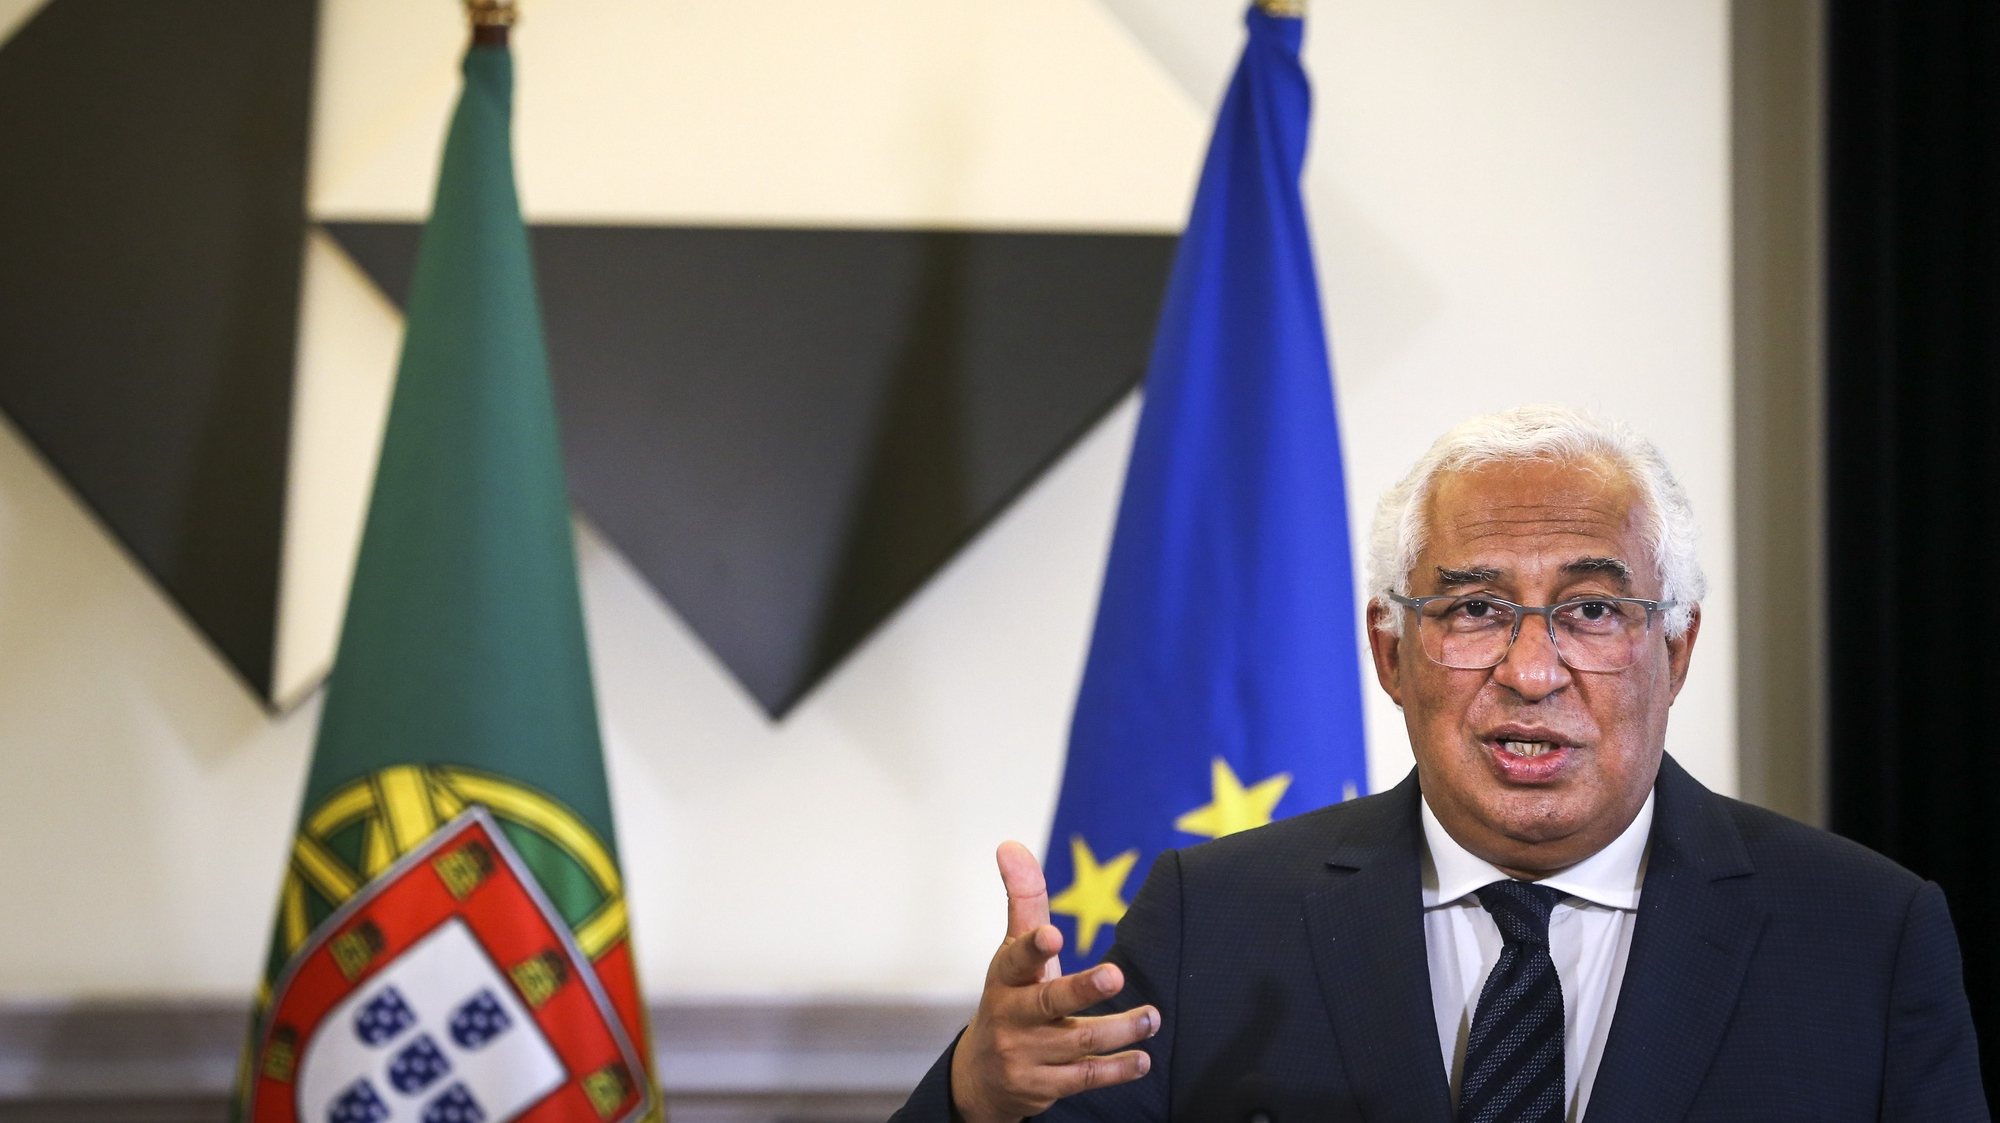 Portuguese Prime Minister Antonio Costa and Argentine President Alberto Fernandez (not seen) attend a press conference at the end of a meeting at Sao Bento Palace in Lisbon, Portugal, 10 May 2021. RODRIGO ANTUNES/LUSA